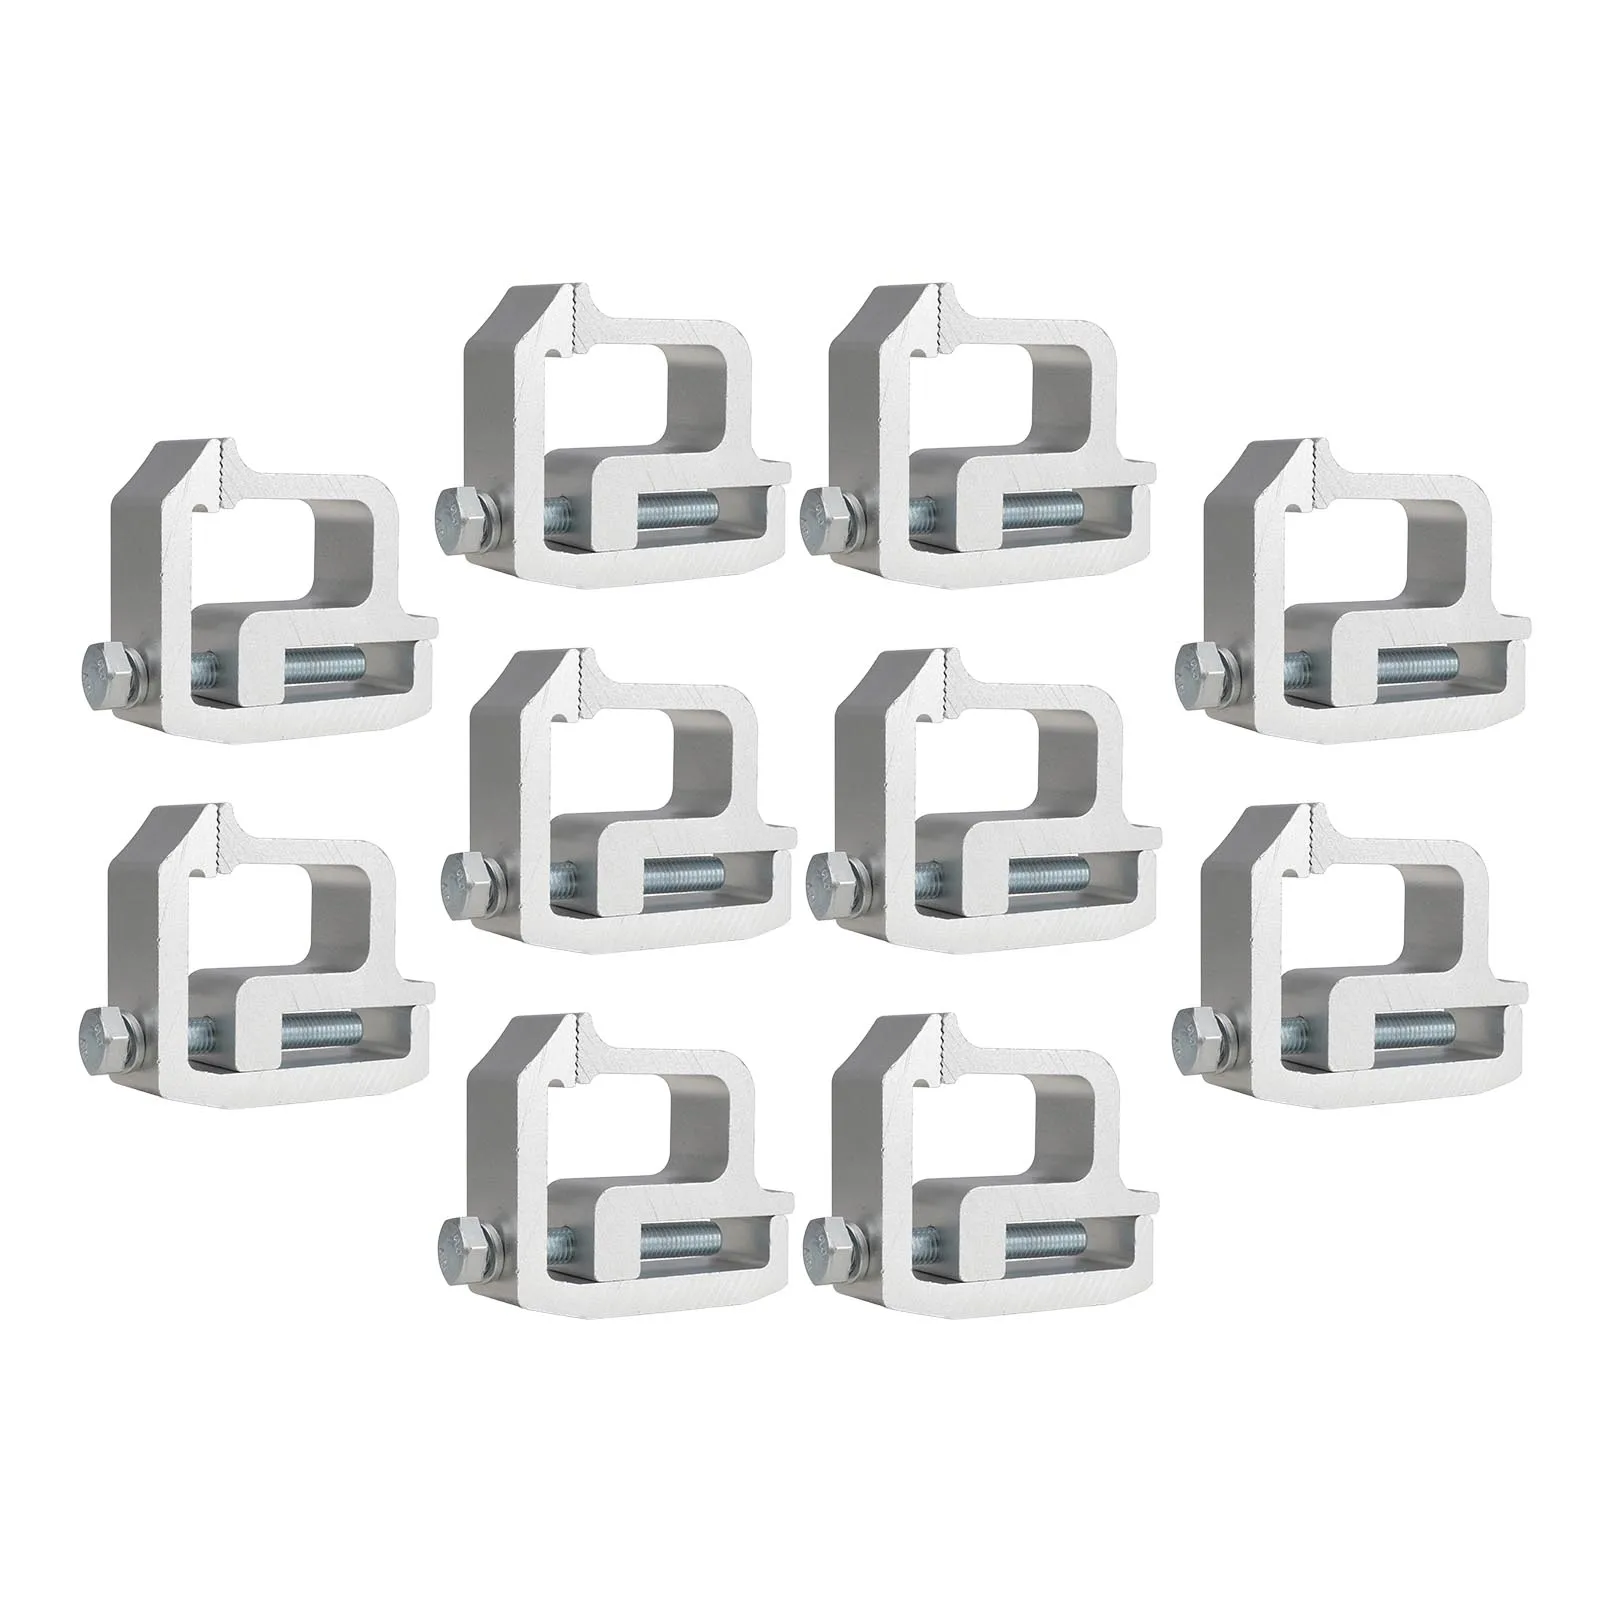 Mounting Clamps Truck Caps Camper Shell for    1500 2500 3500 and More Pick-up Truck Models Truck Bed Parts Silver